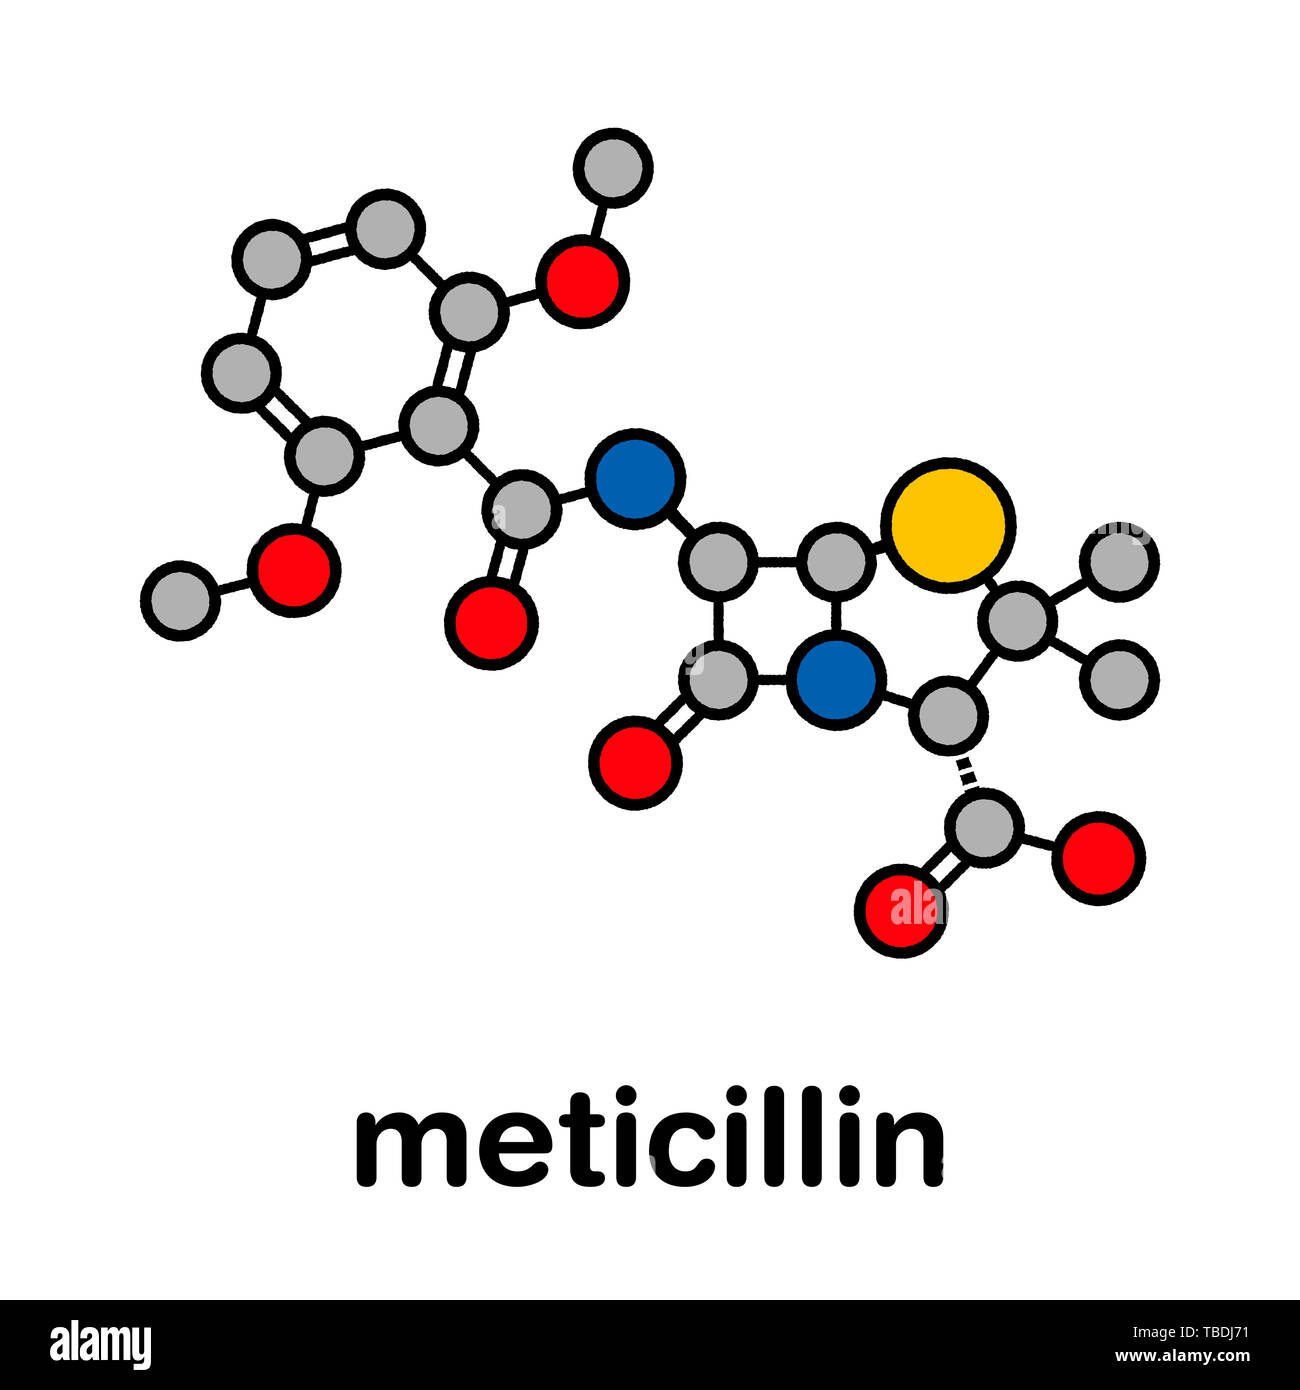 Meticillin antibiotic drug (beta-lactam class) molecule. MRSA stands for Methicillin-resistant staphylococcus aureus. Stylized skeletal formula (chemical structure). Atoms are shown as color-coded circles with thick black outlines and bonds: hydrogen (hidden), carbon (grey), nitrogen (blue), oxygen (red), sulfur (yellow). Stock Photo